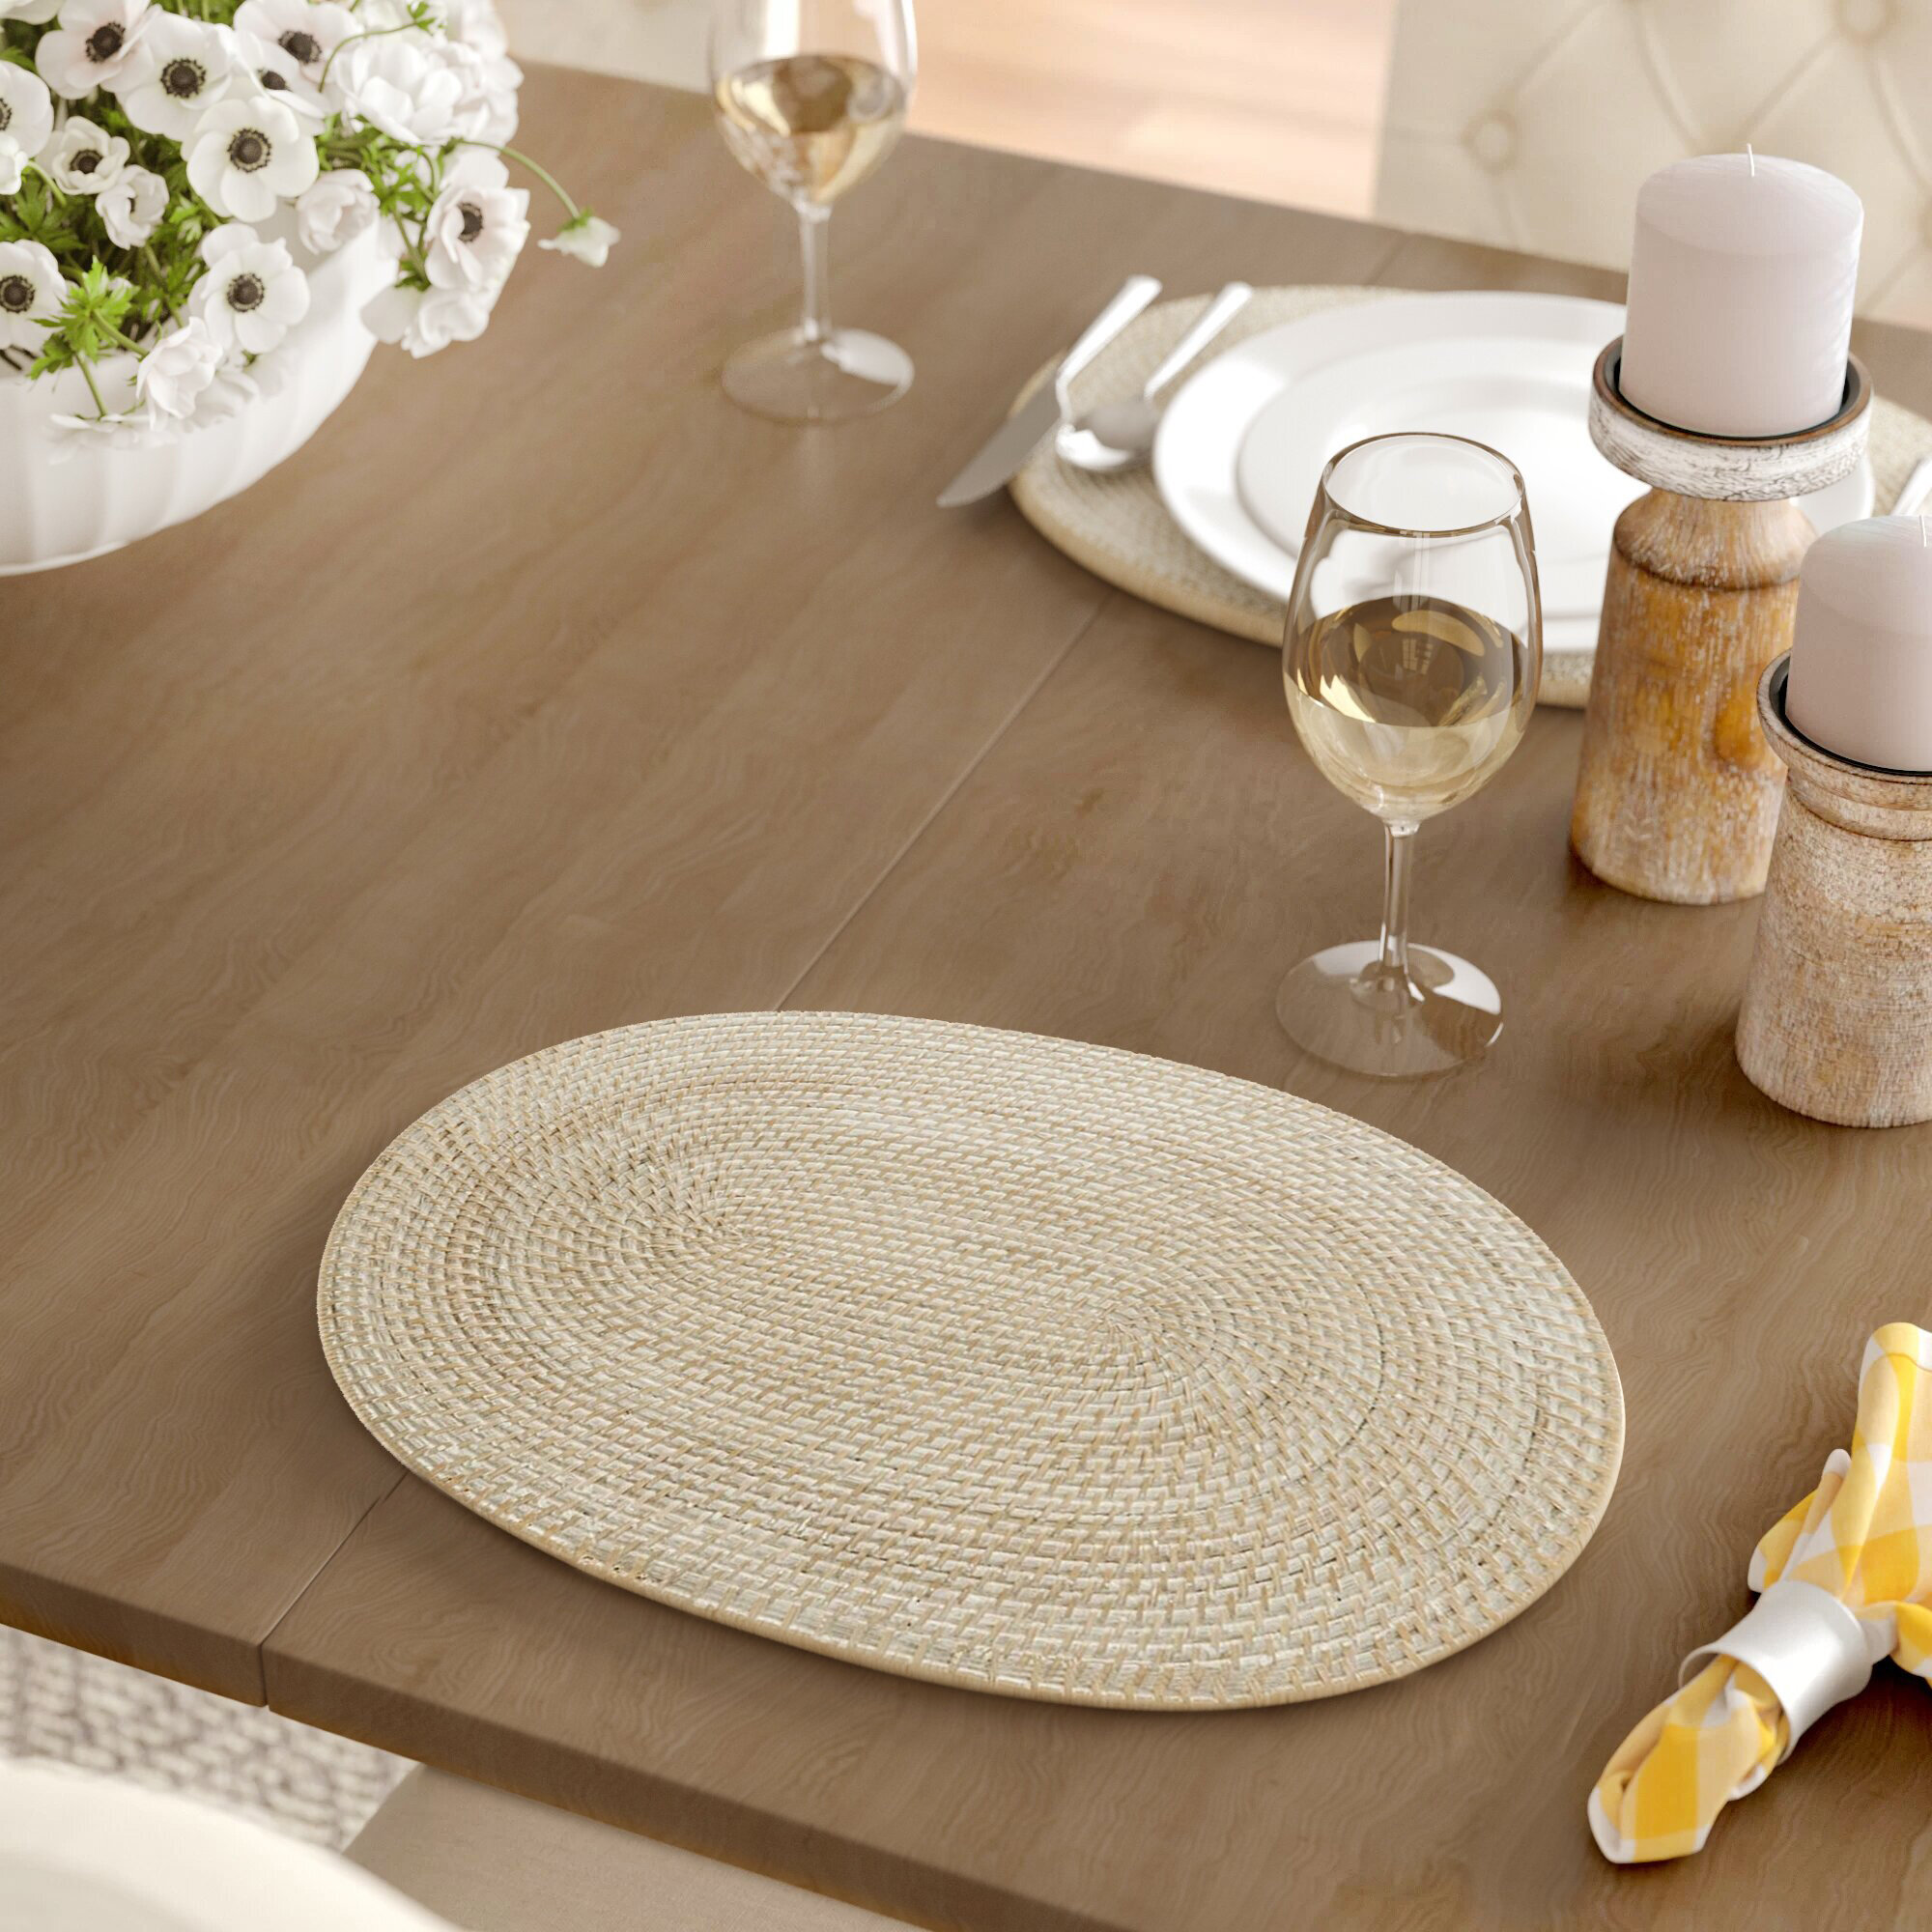 Ana Home 11.8 Table Placemats Set of 4 Braided Rattan Placemats Round Table Placemats Farmhouse Table Mats Set for Dining Table